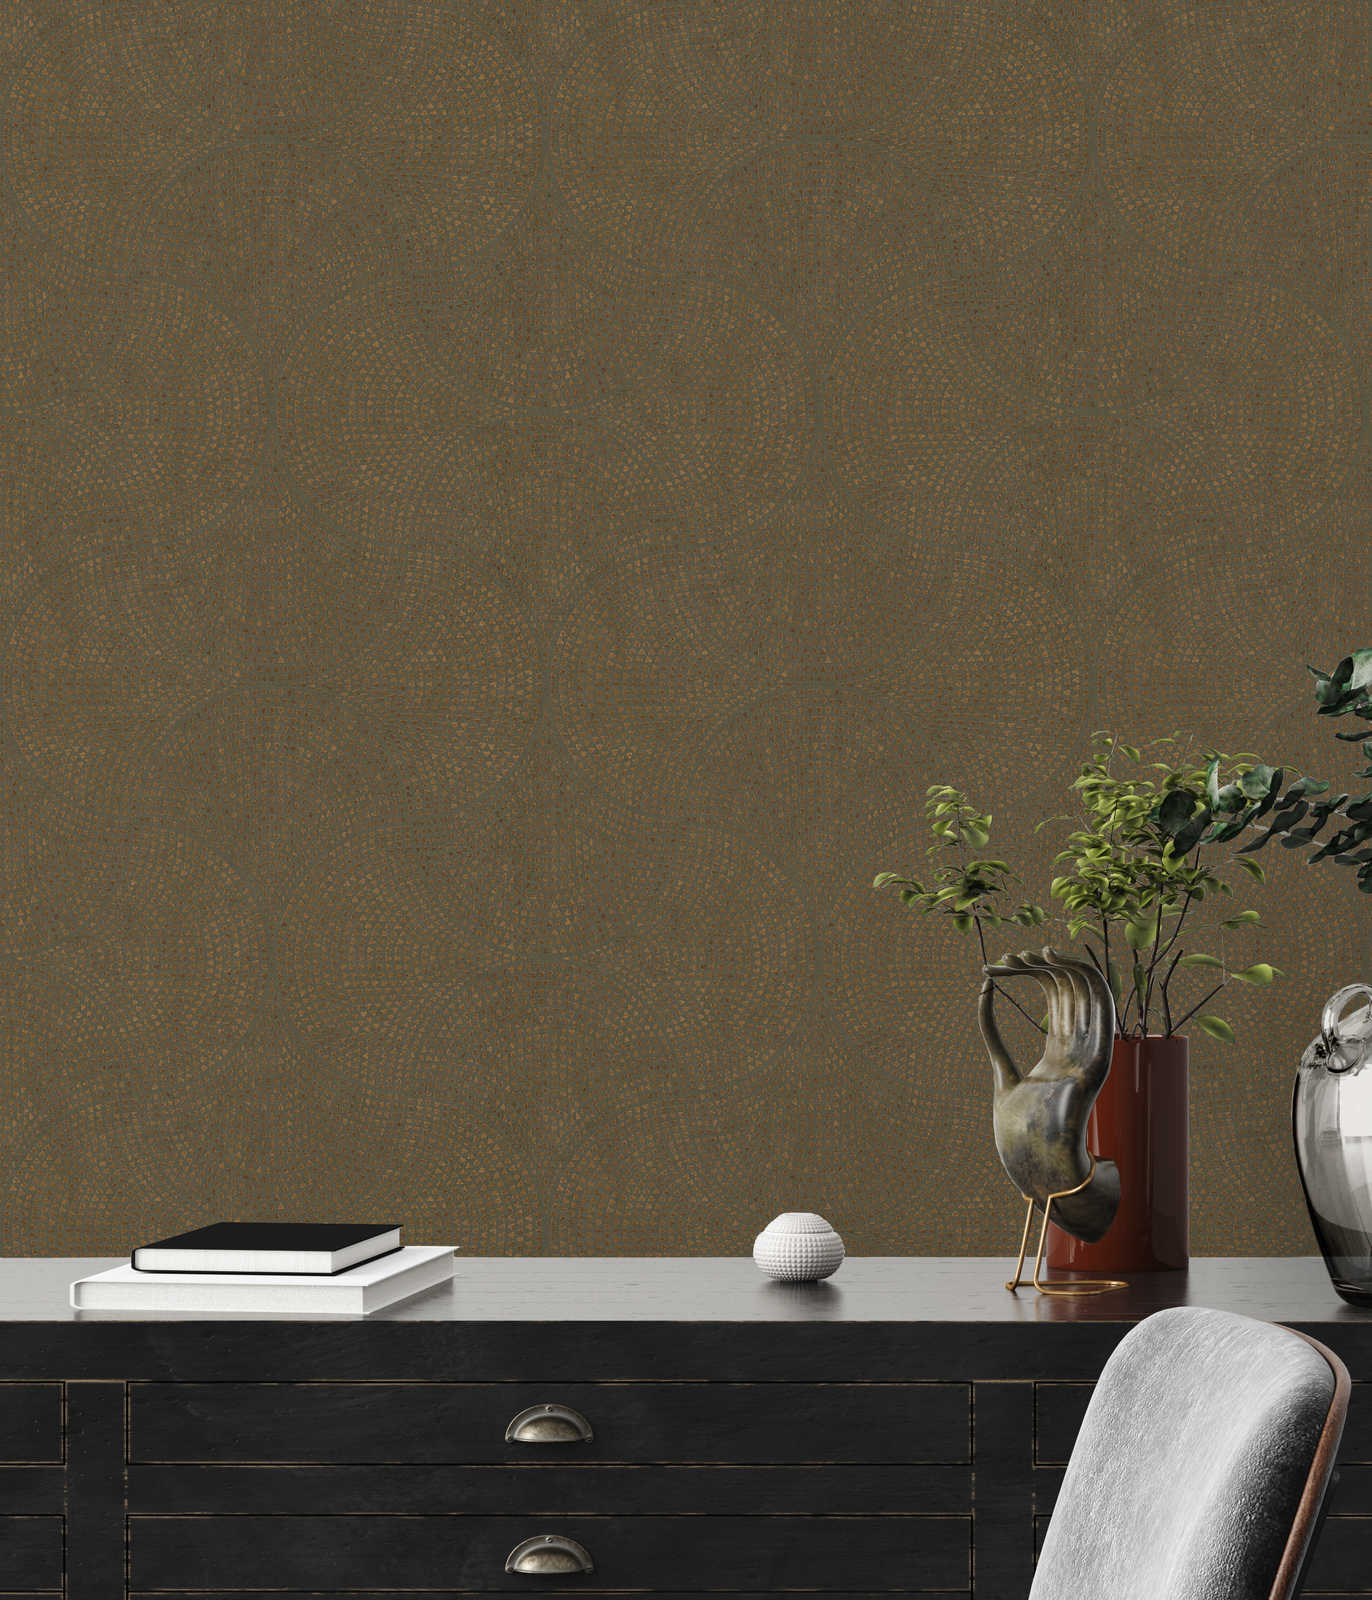             Brown wallpaper with copper pattern in mosaic style - brown, metallic
        